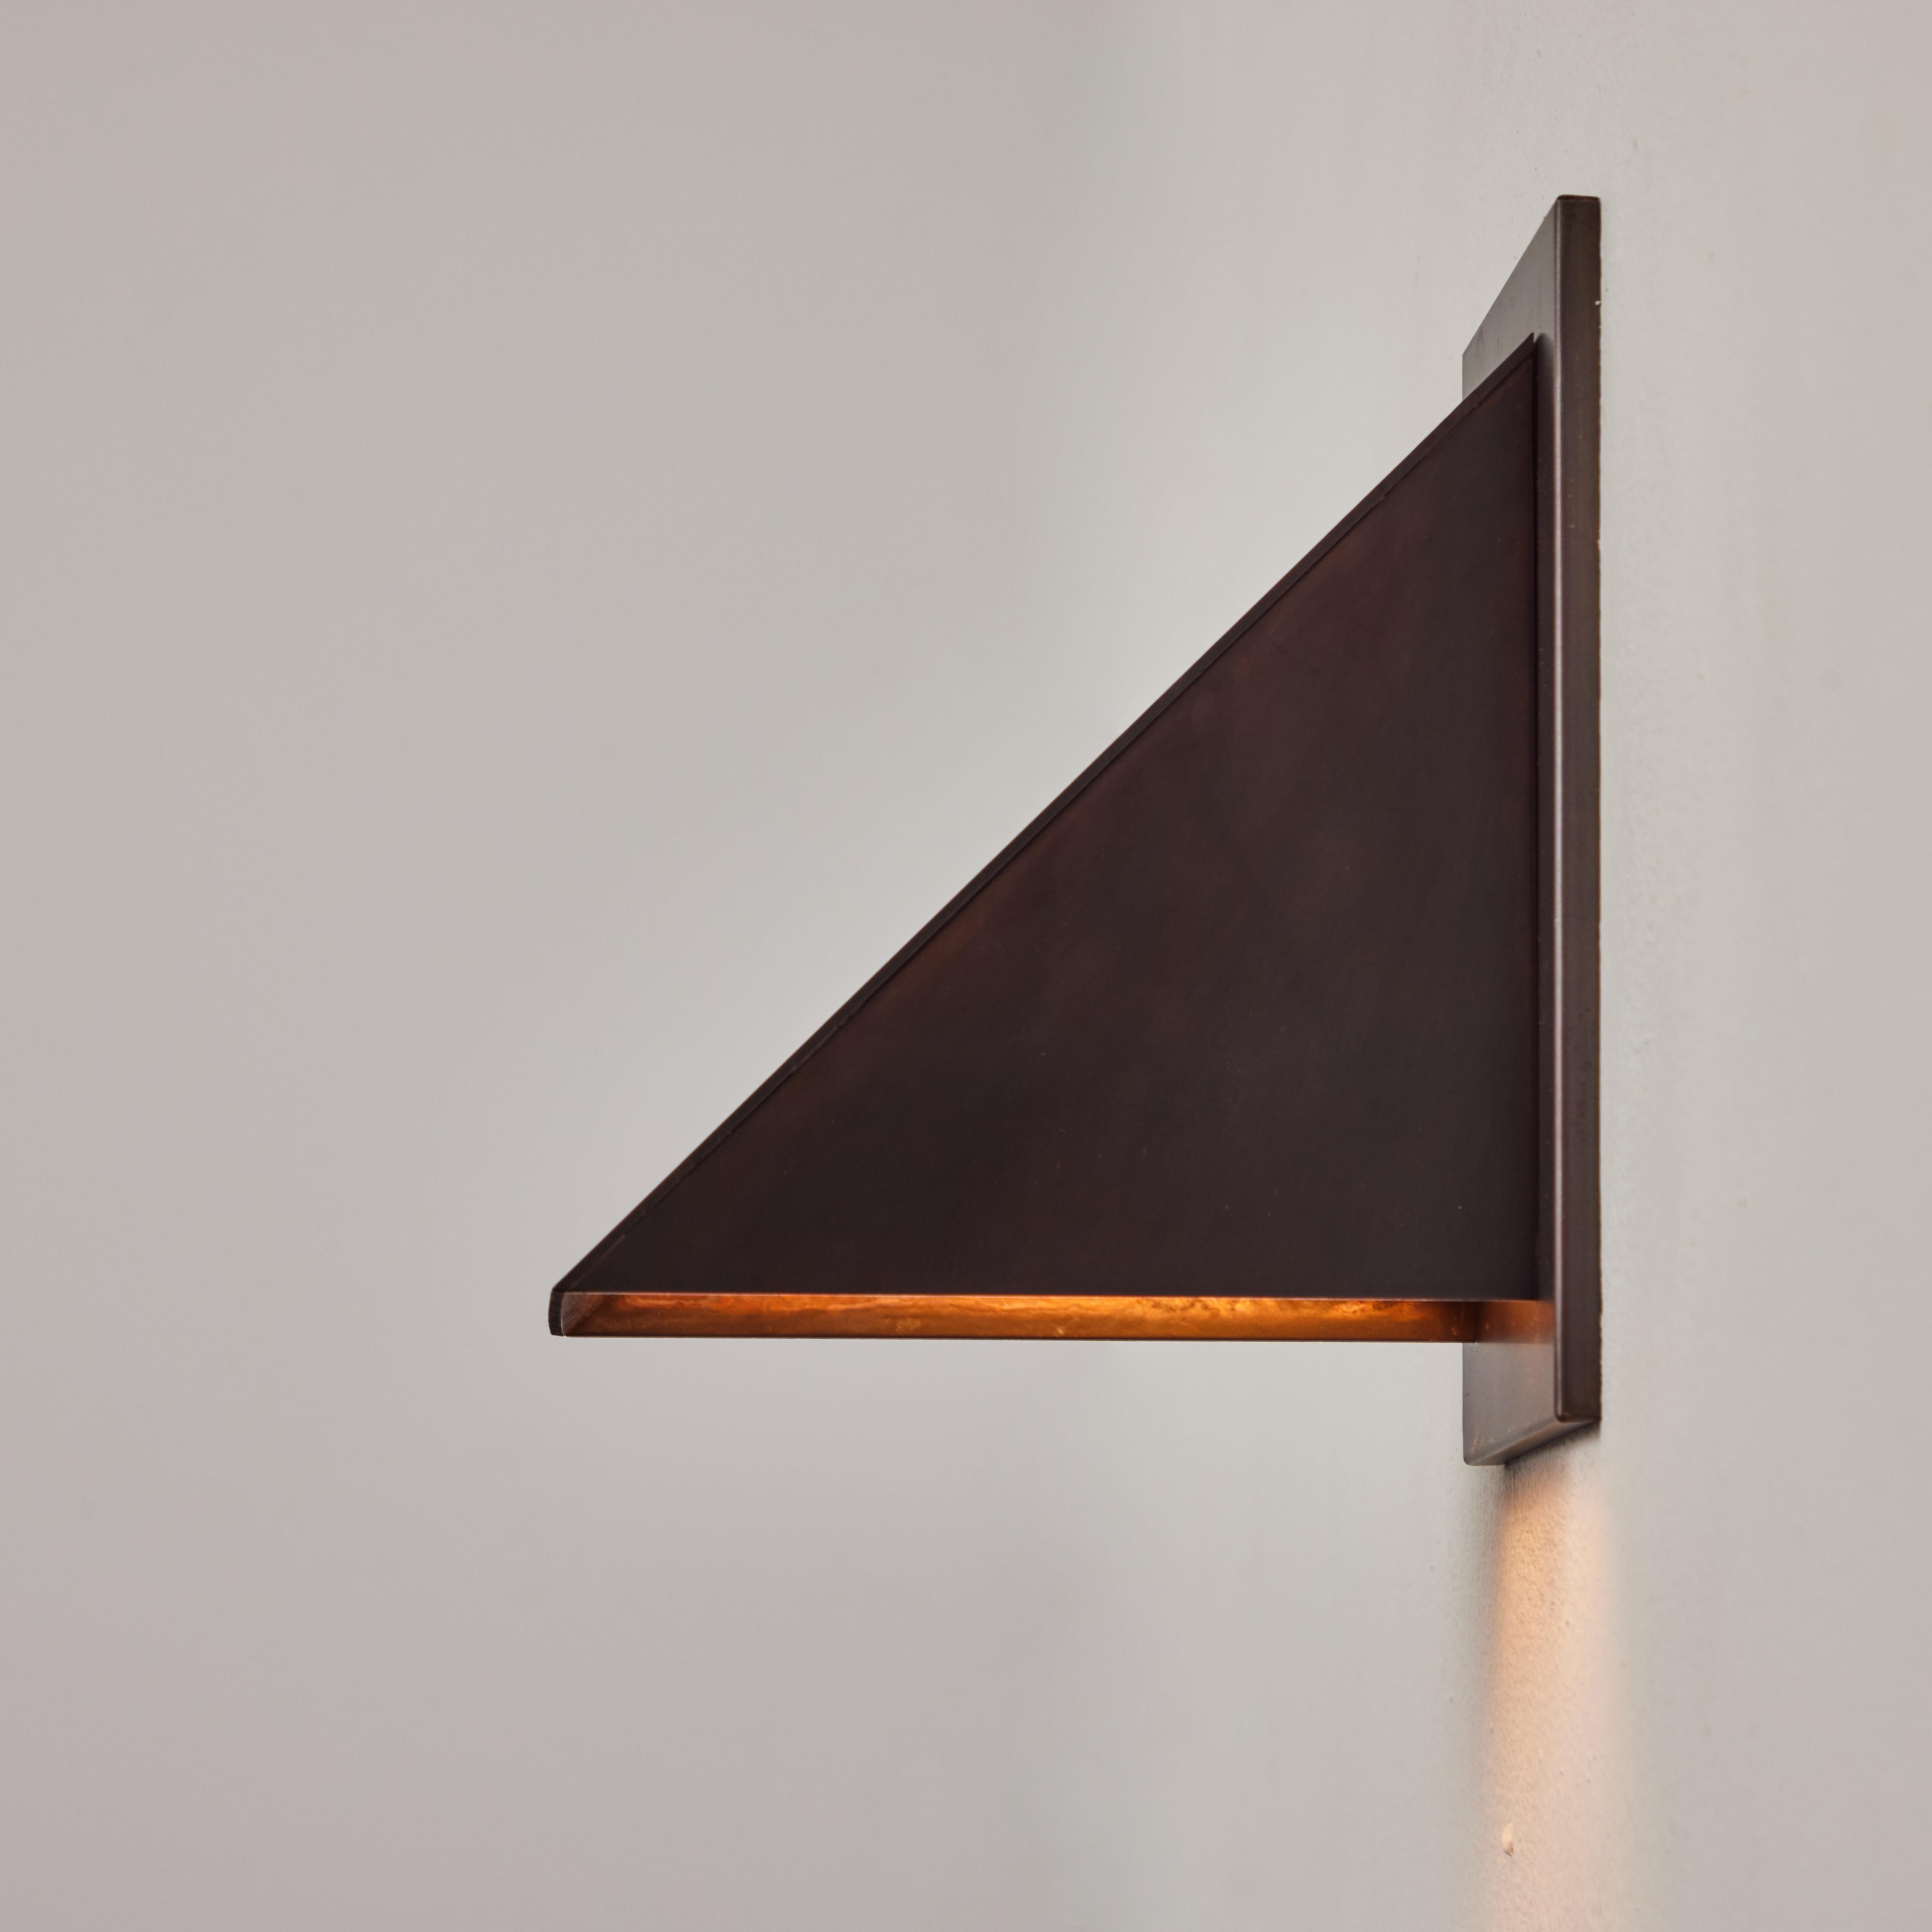 Jonas Bohlin 'Oxid' Dark Brown Patinated Outdoor Wall Light for Örsjö. Executed in richly patinated metal with an opaline glass diffuser. An incredibly refined and clean geometric design that is quintessentially Scandinavian. For indoor or outdoor